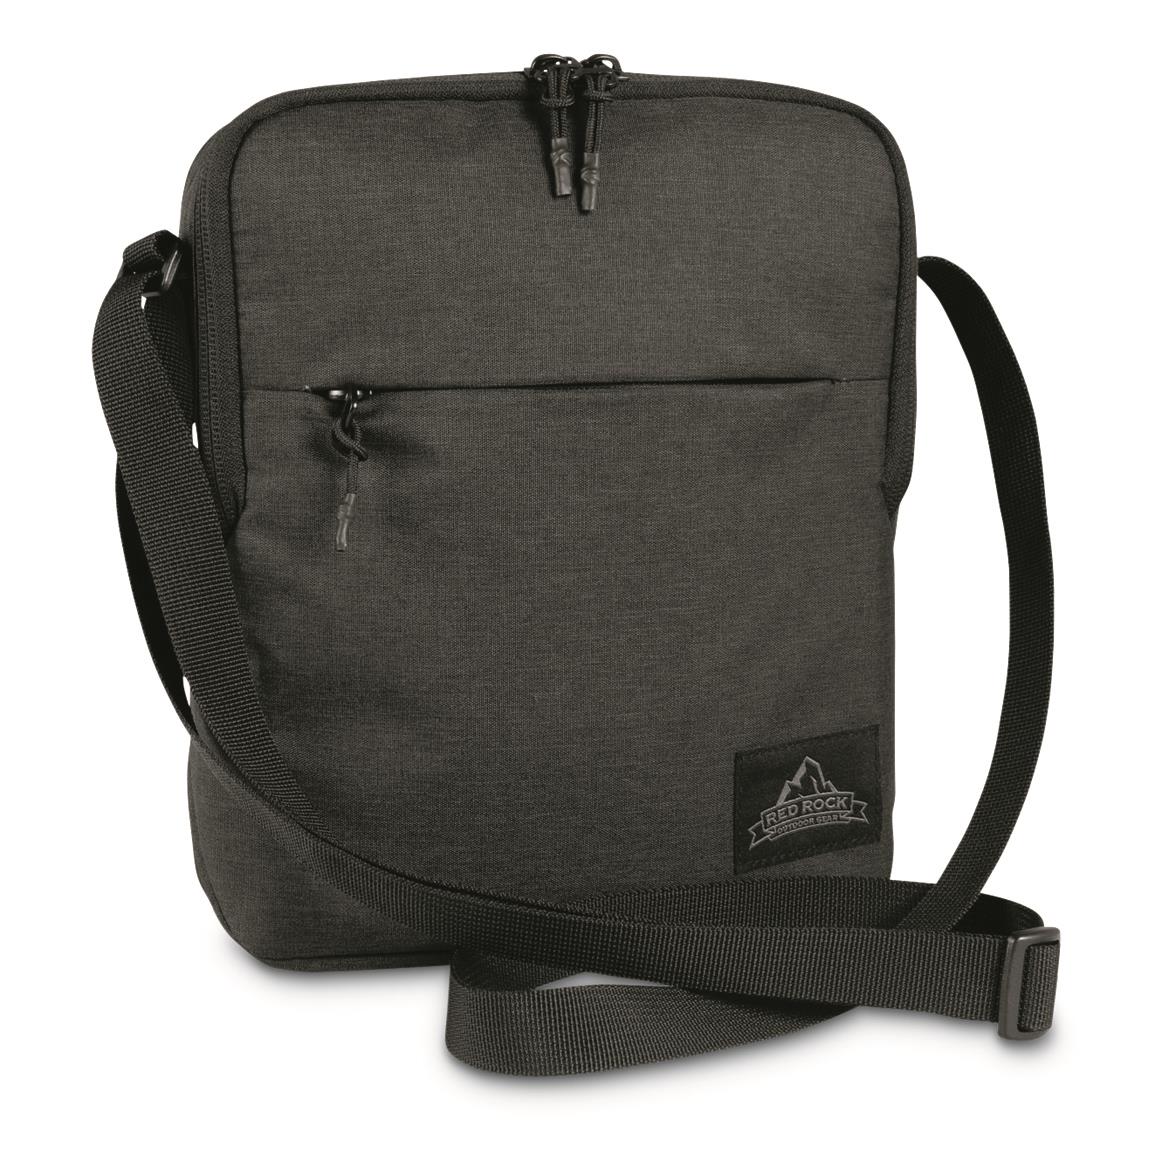 Red Rock Outdoor Gear 4.5L Pecos Crossbody Pack, Charcoal